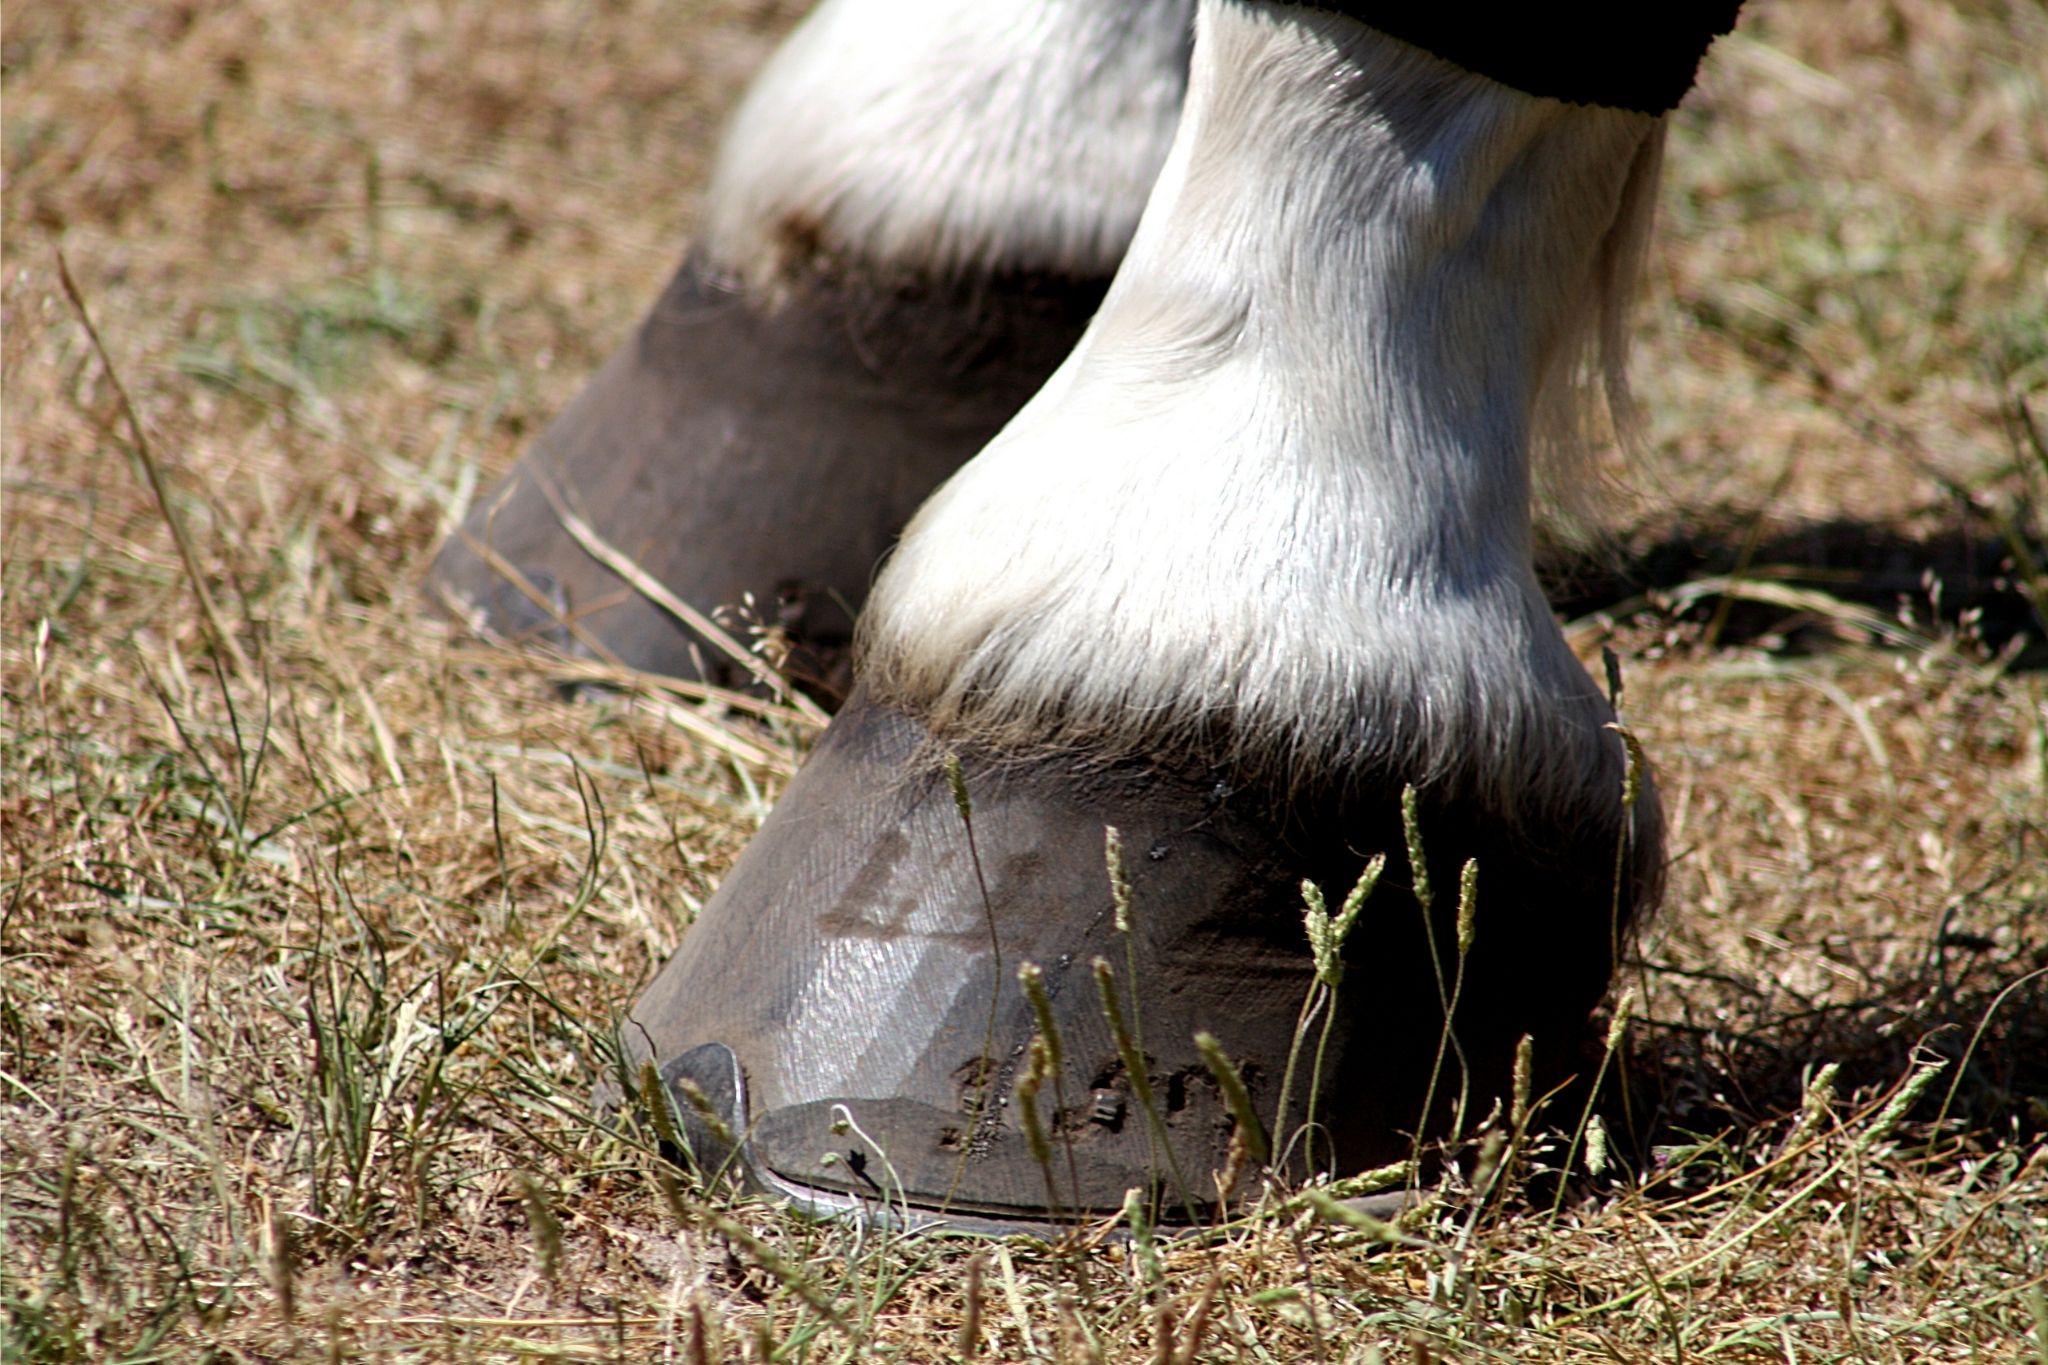 Horse Hoof Terminology Every Equestrian Should Know - Horse Rookie